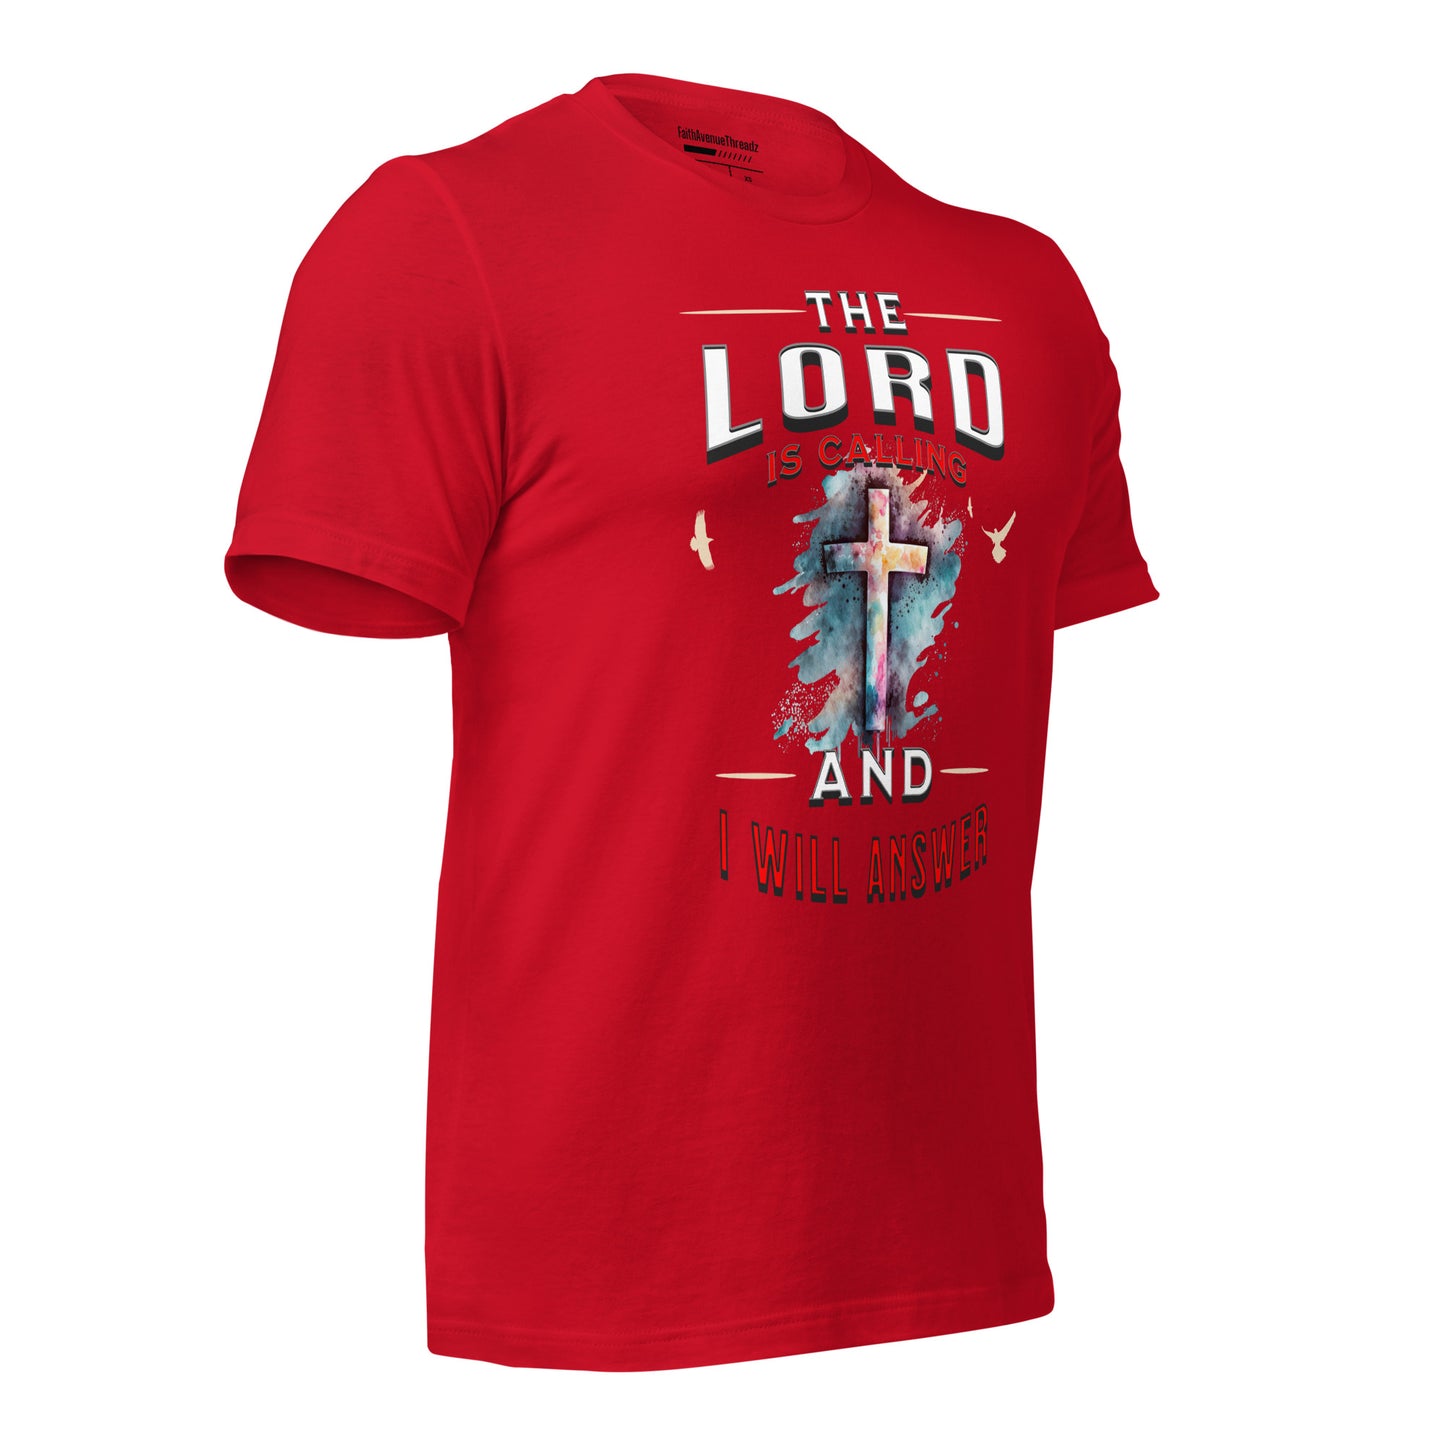 The Lord Is Calling Christian T-shirt